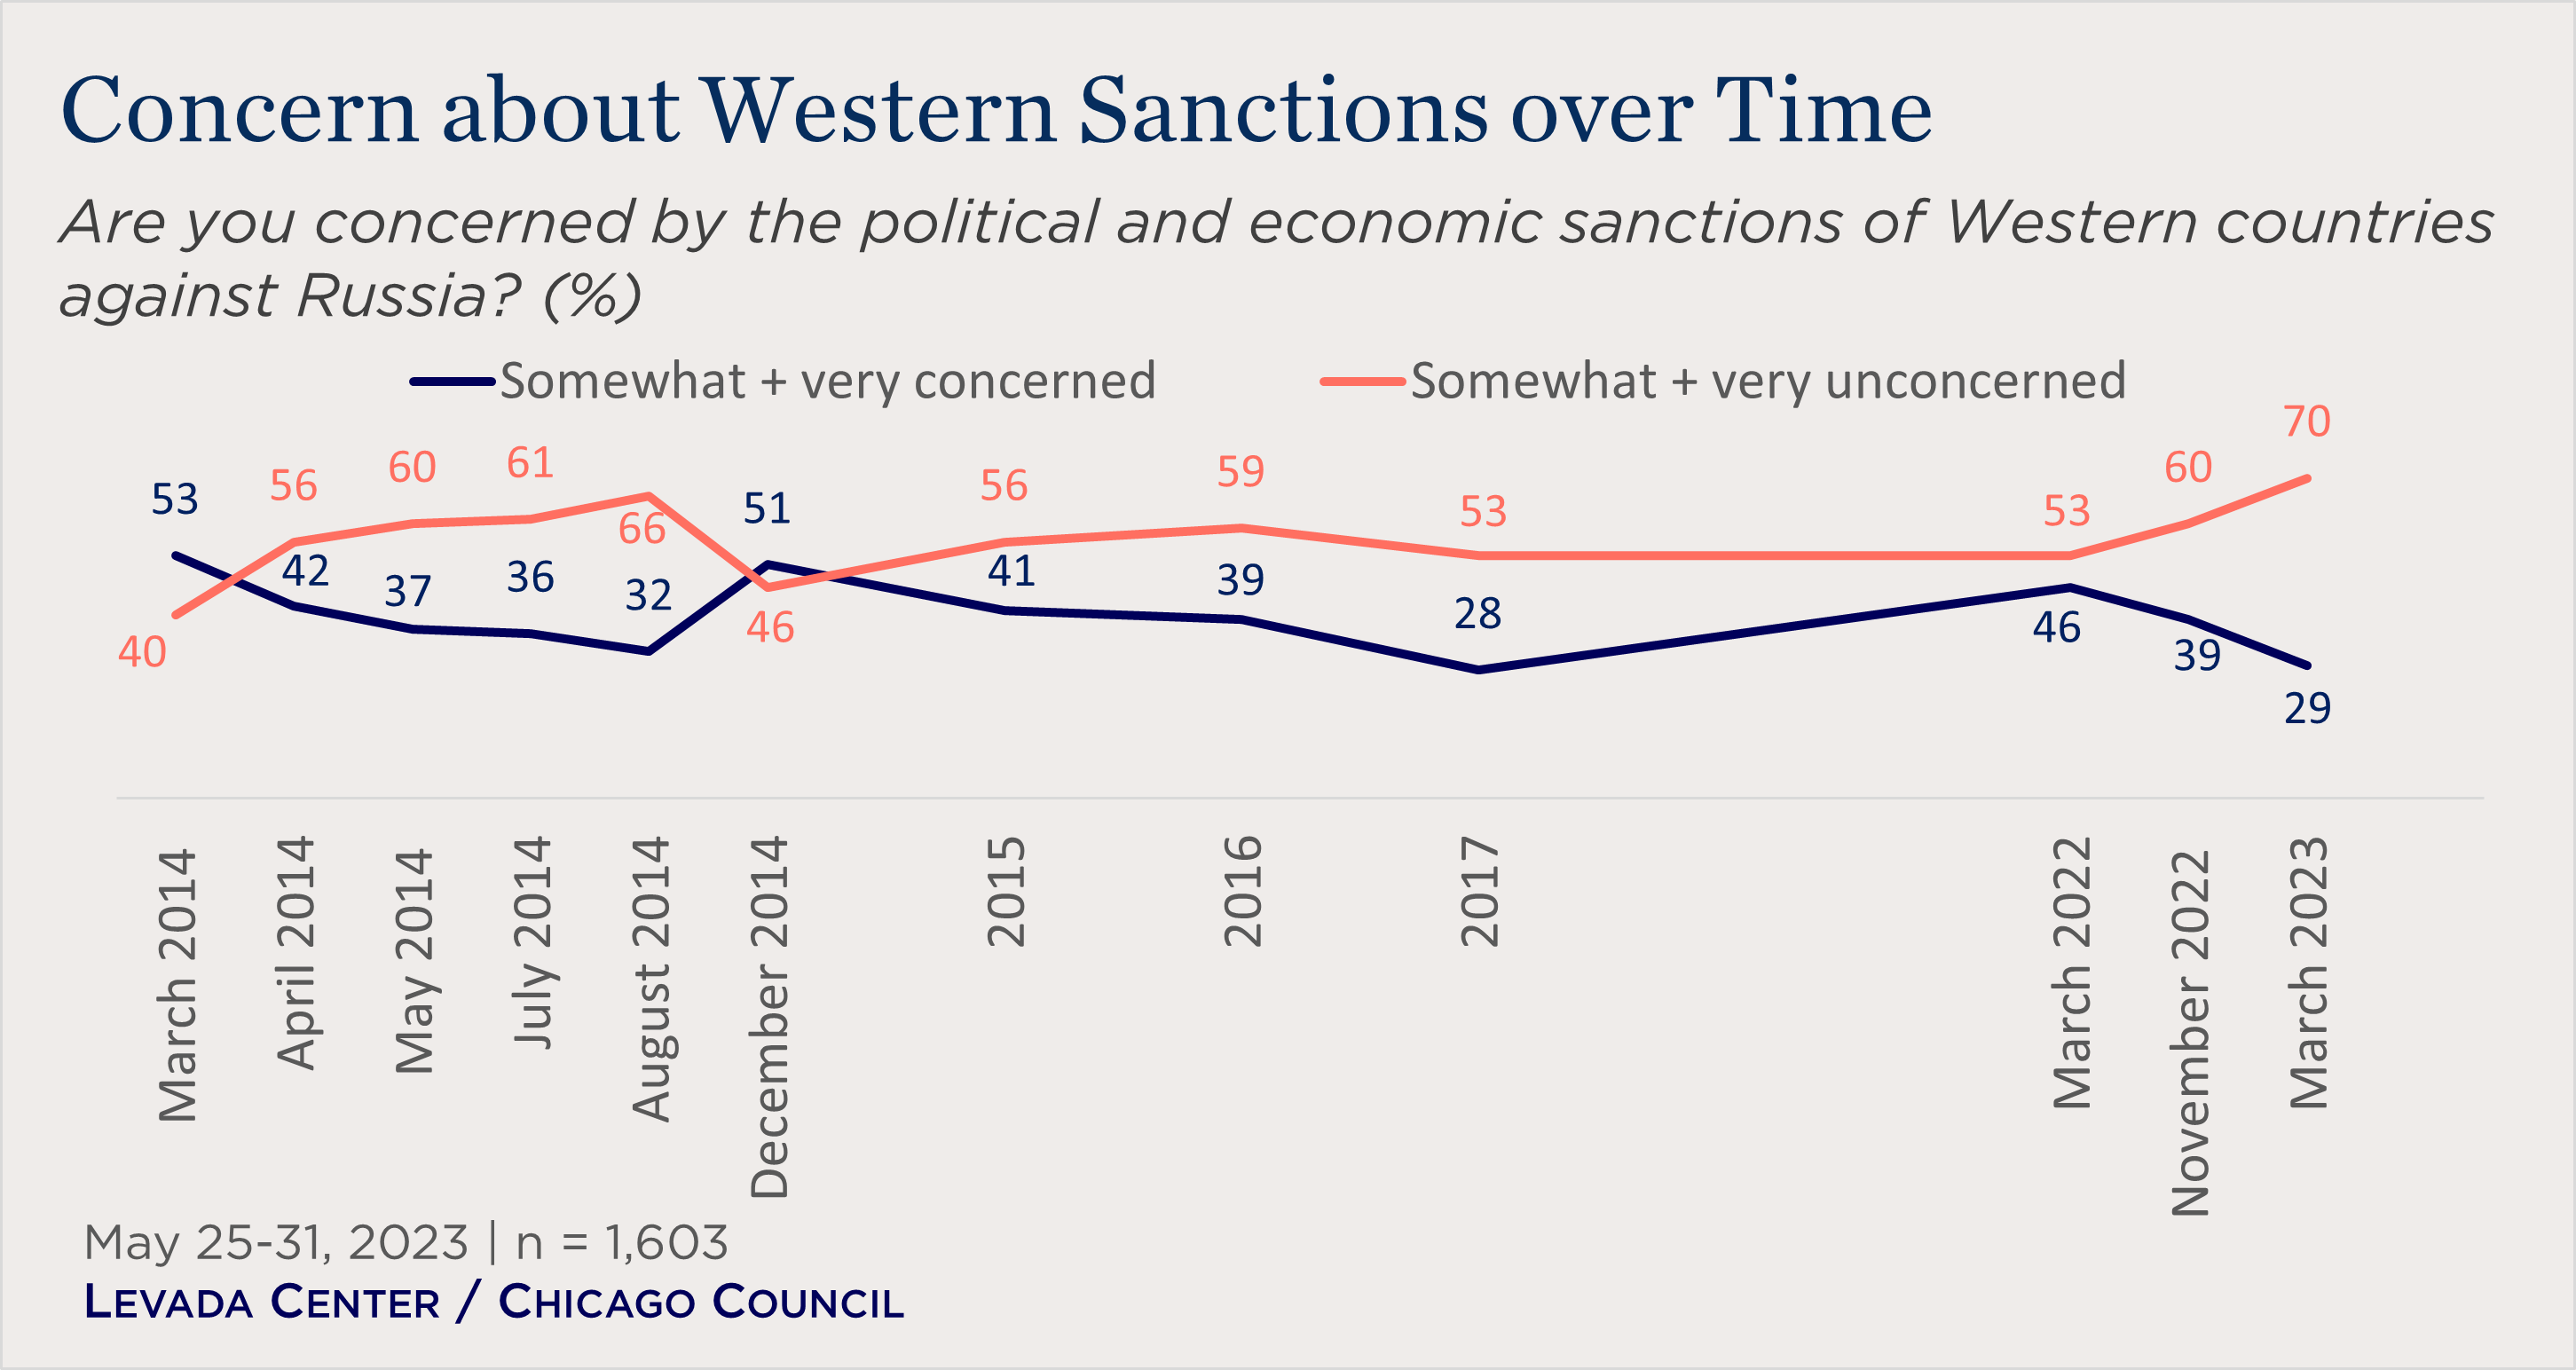 "line chart showing concern about Western sanctions over time"